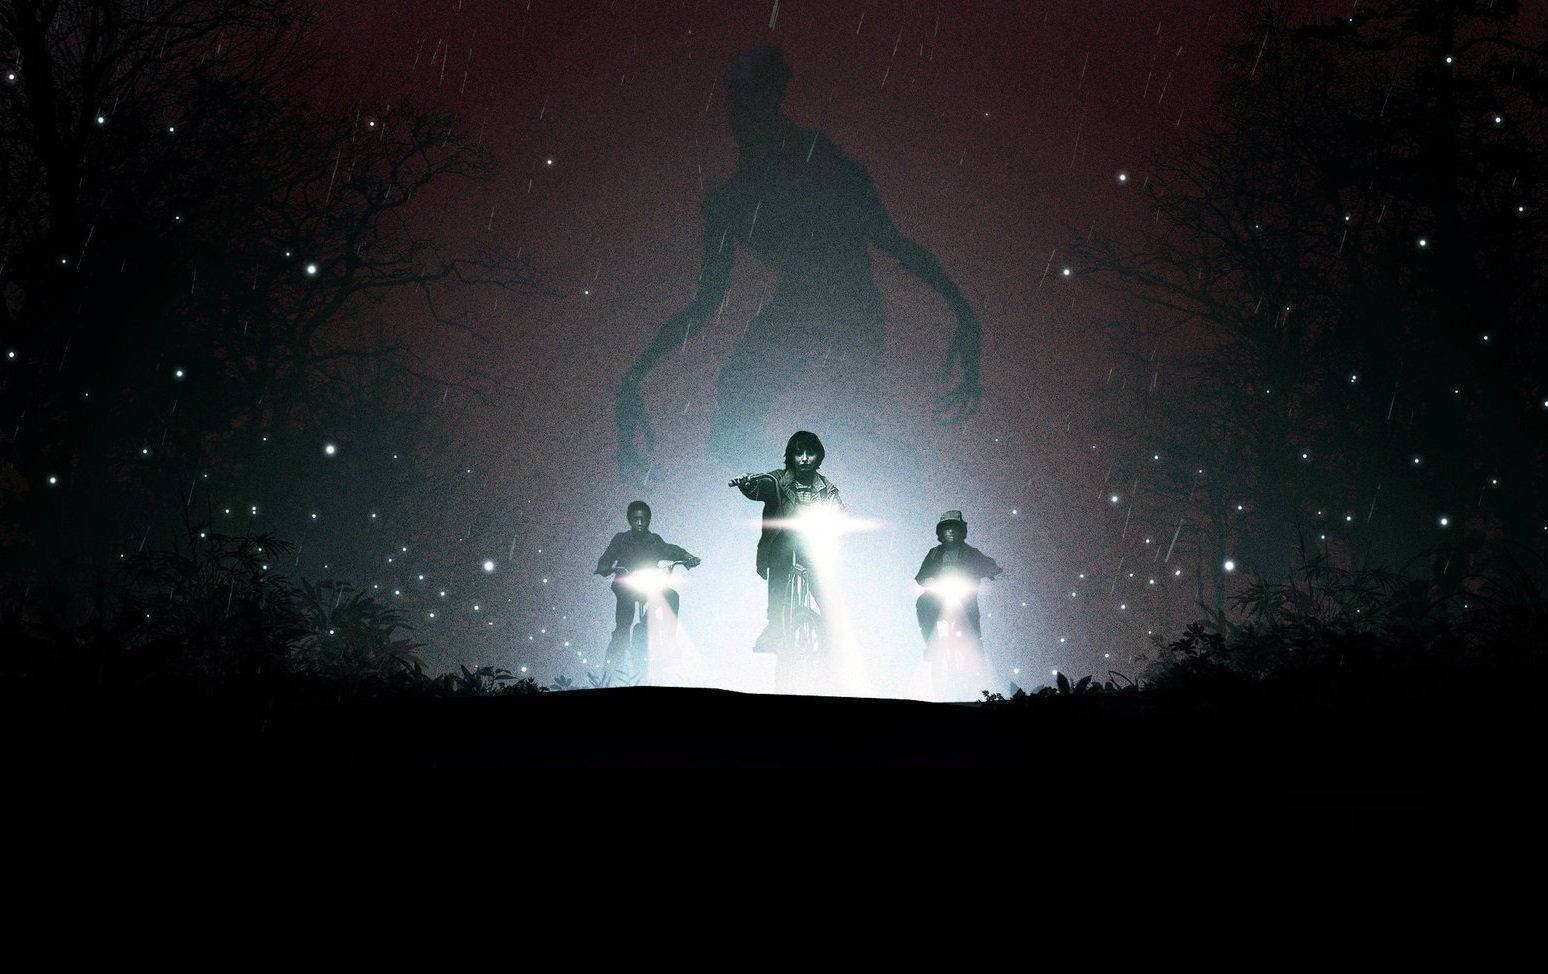 Stranger Things 1548X974 Wallpaper and Background Image